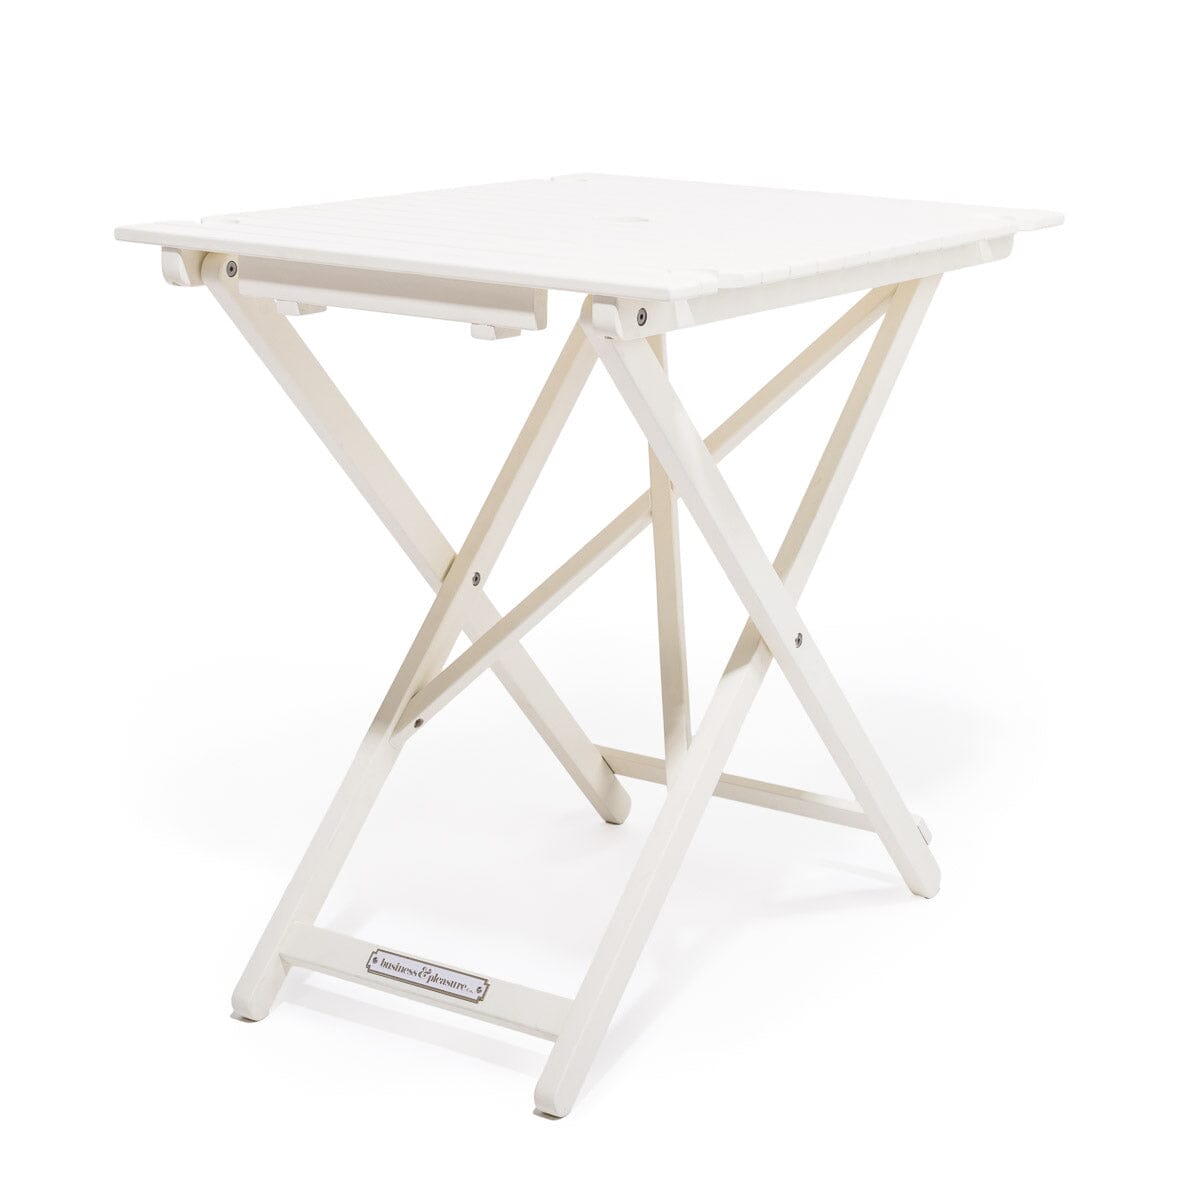 The Tall Folding Table - Antique White Tall Folding Table Business & Pleasure Co Aus 